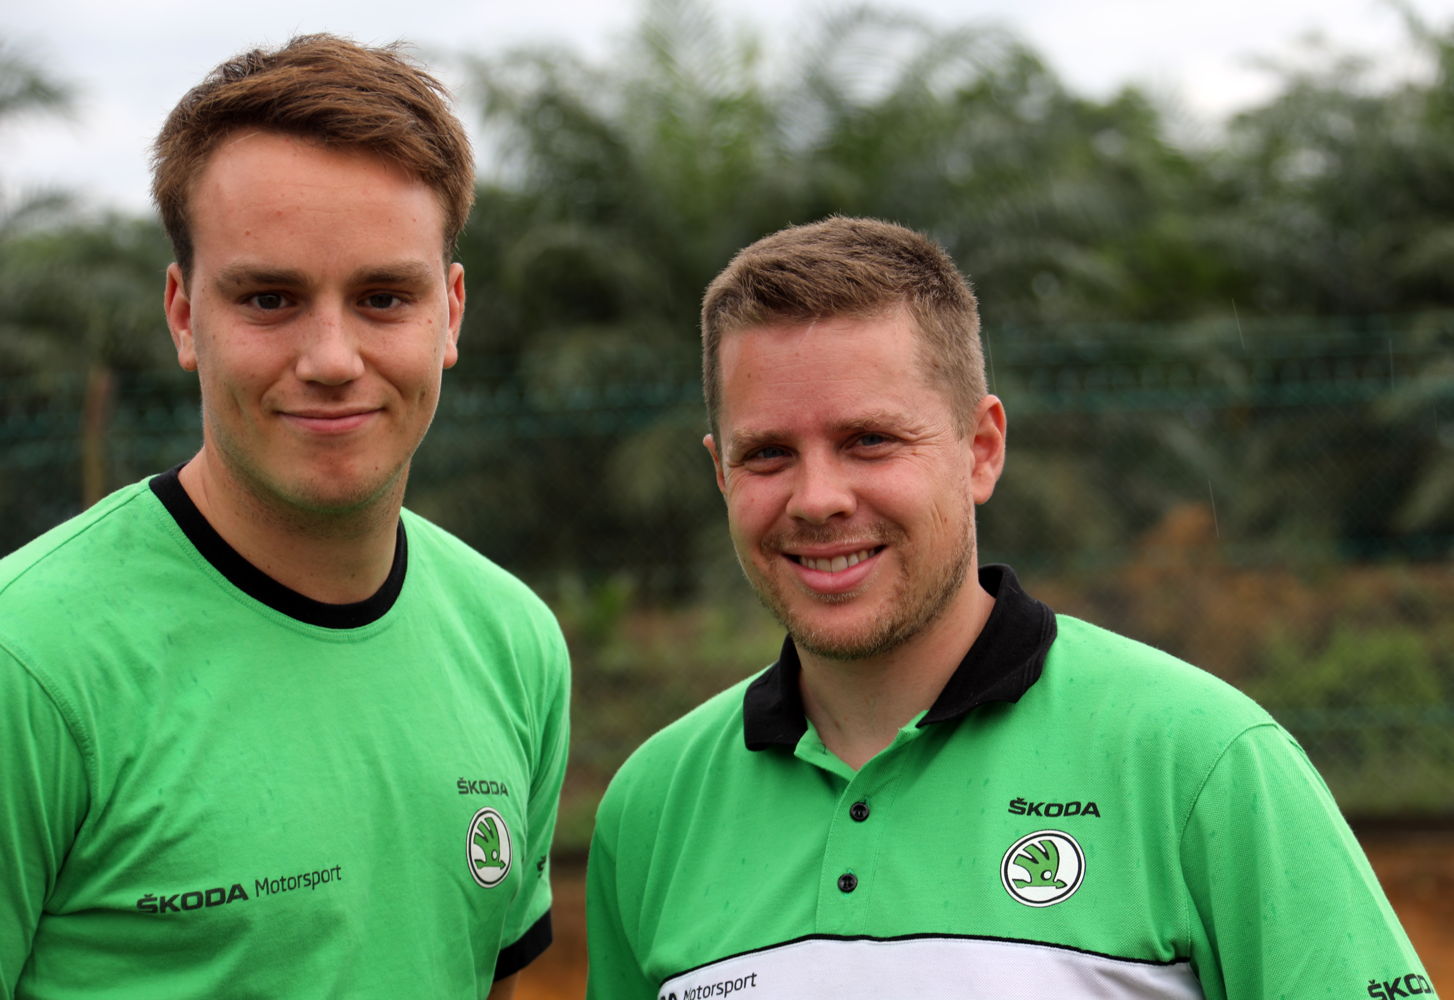 Ole Christian Veiby (left) and co-driver Stig Rune Skjaermoen (ŠKODA FABIA R5) are competing for the factory team of ŠKODA Motorsport for the first time.